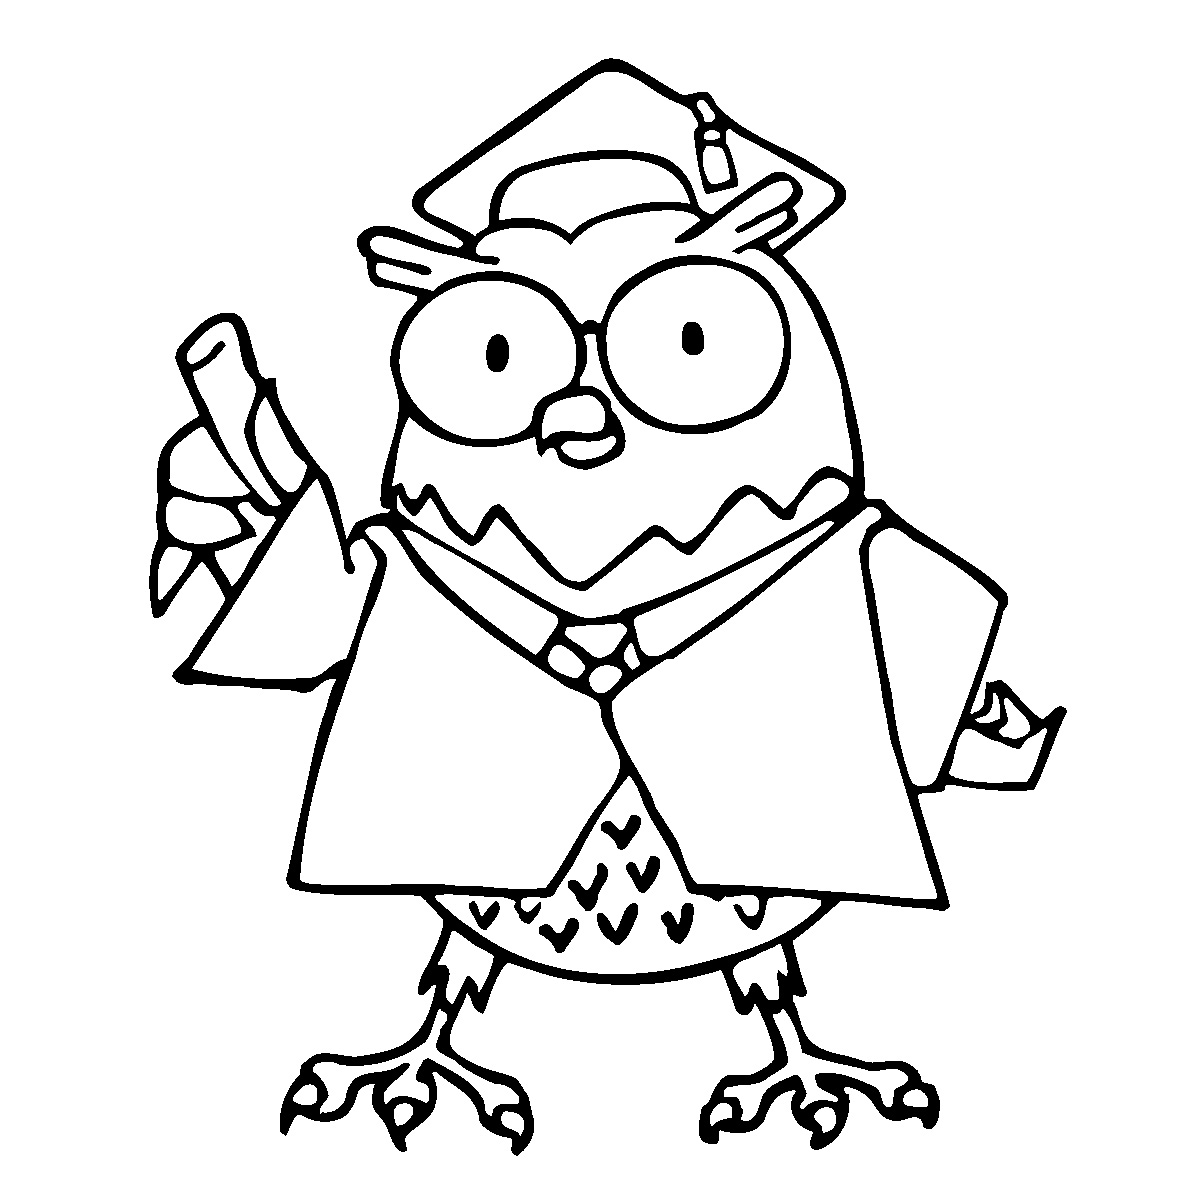 free-cartoon-owl-coloring-pages-download-free-cartoon-owl-coloring